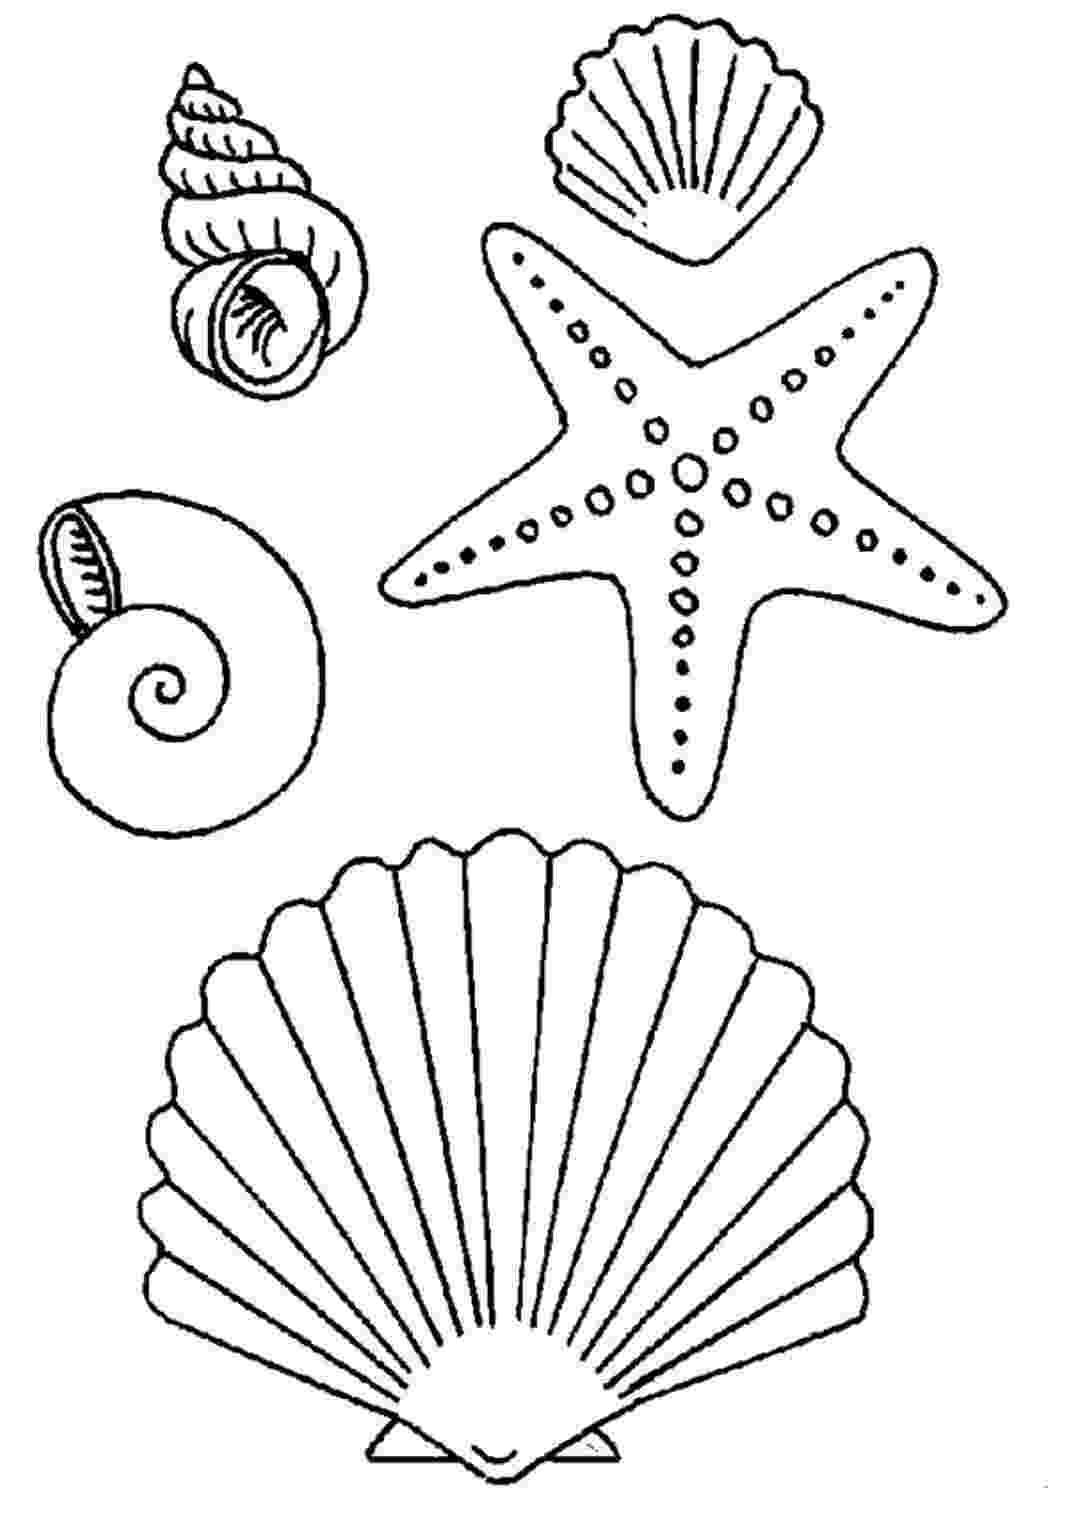 seashell coloring page seashell coloring pages 1111 seashell page coloring 